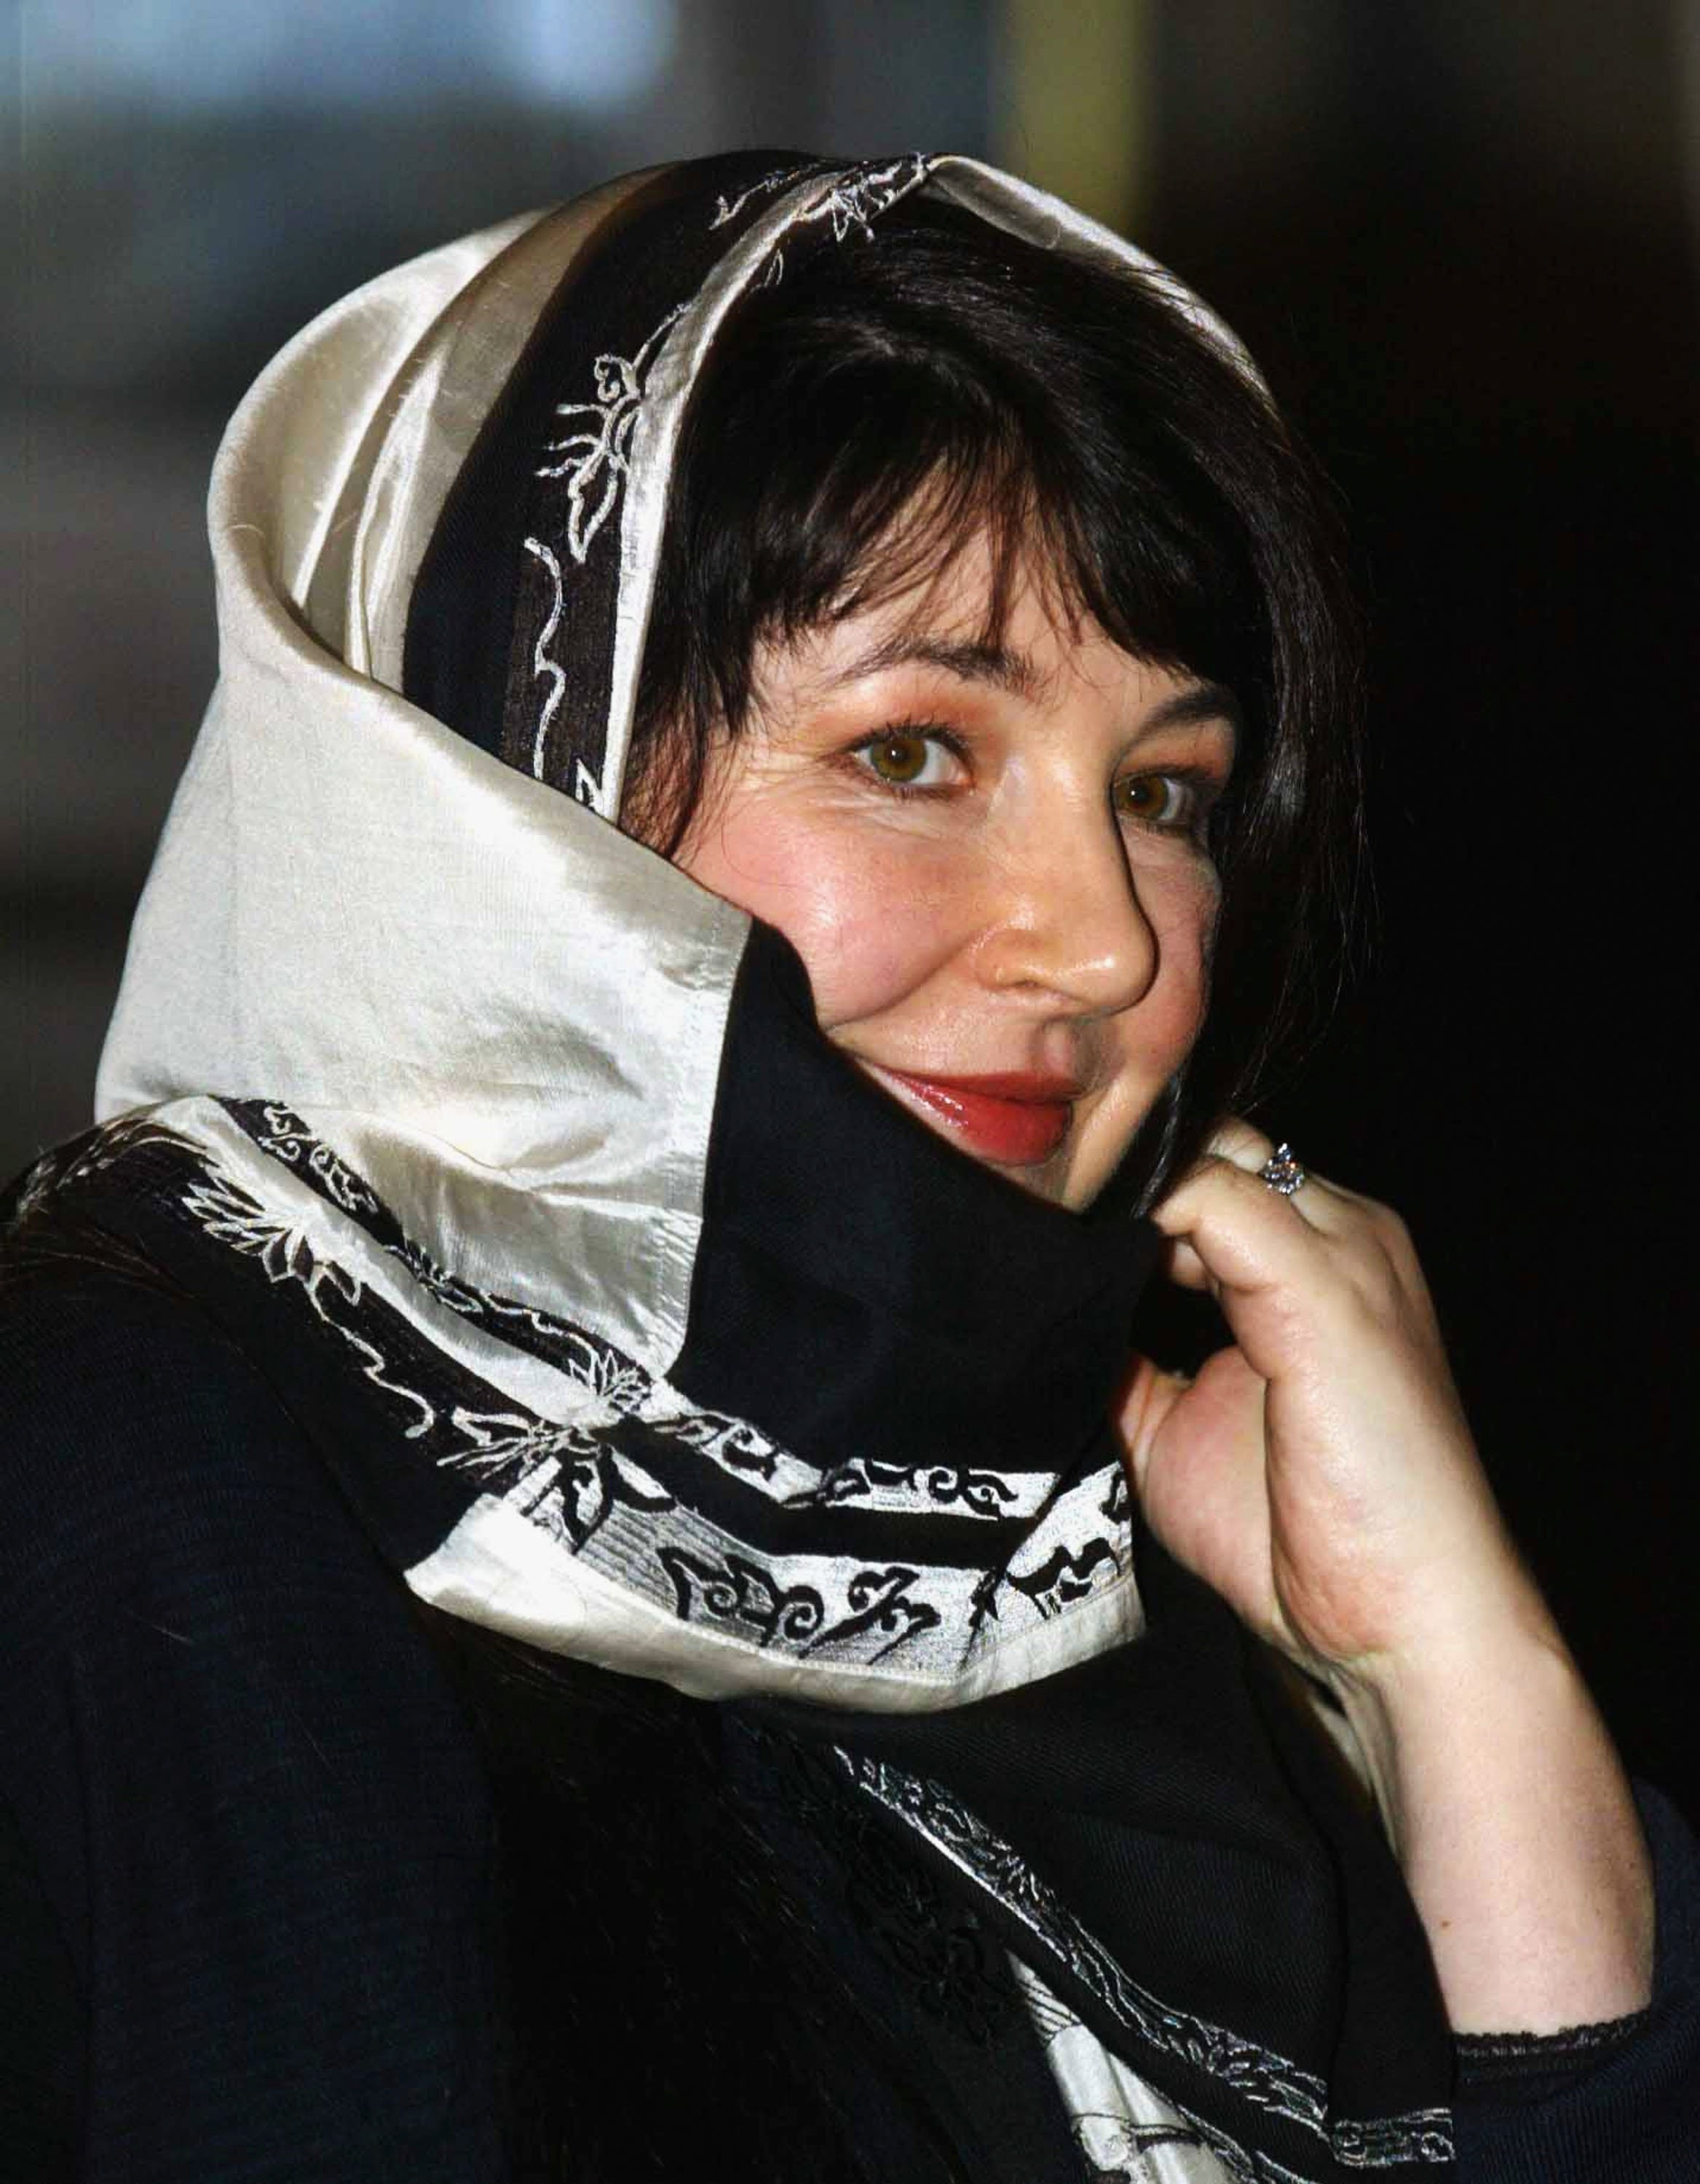 Kate Bush arriving at the "Music Day At The Palace" event at Buckingham Palace on March 1, 2005 | Photo: Getty Images